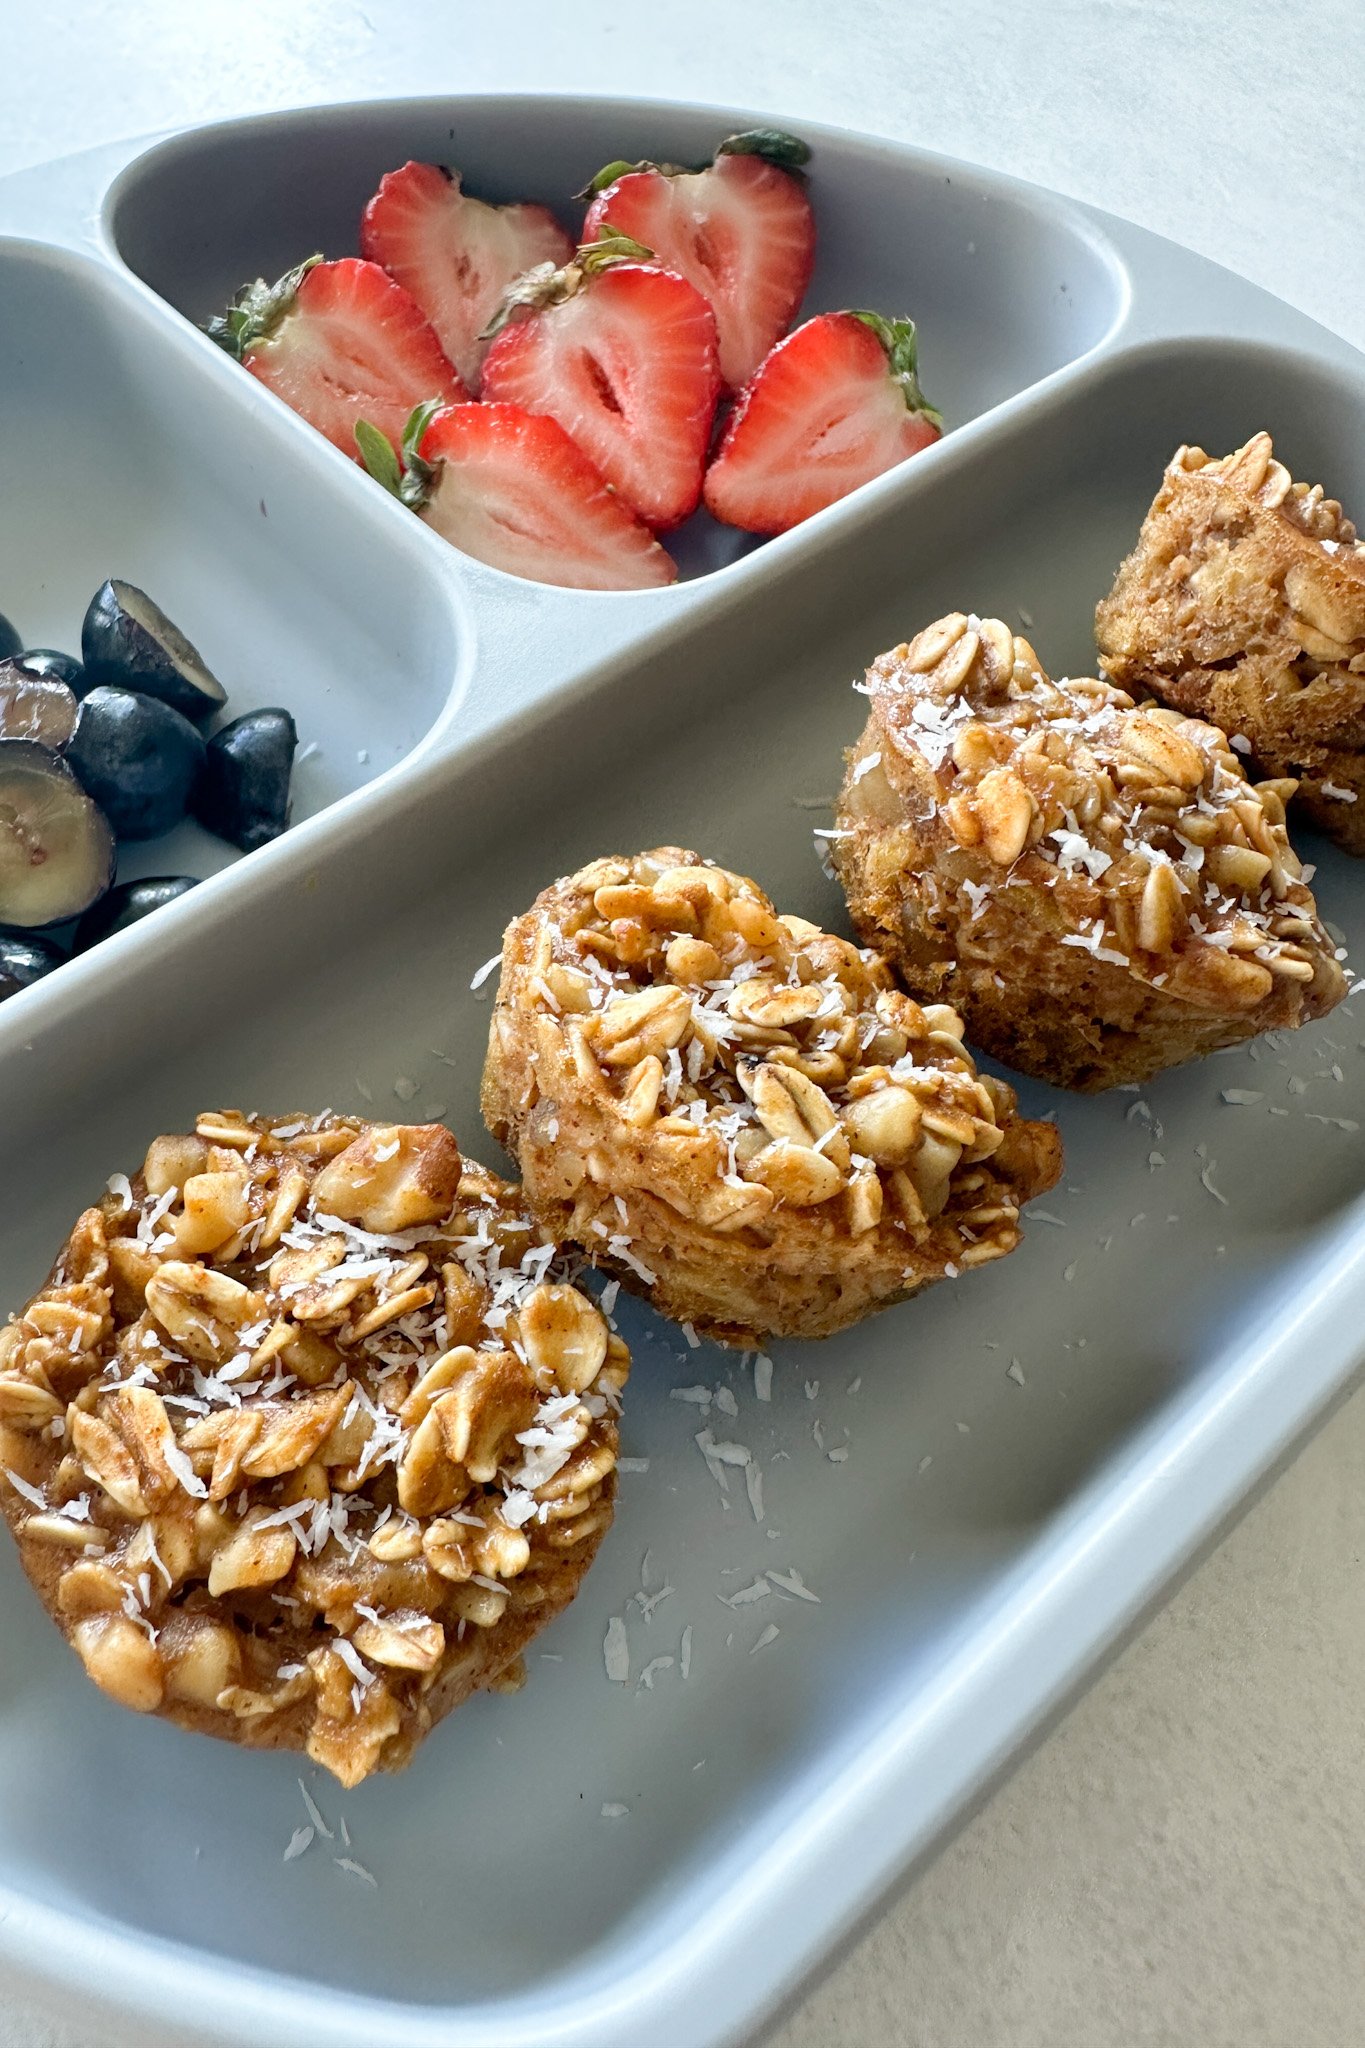 Pumpkin apple oatmeal muffins served with berries.